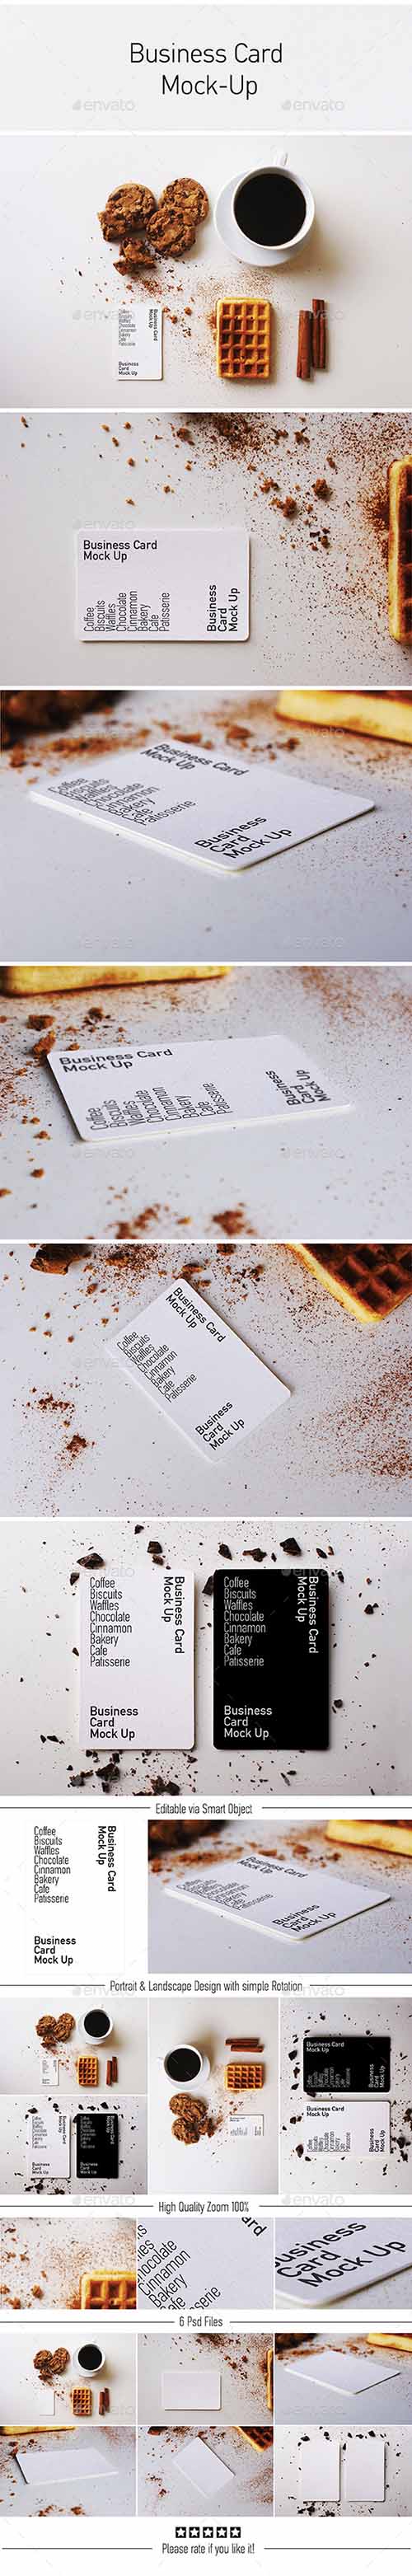 GraphicRiver: Business Card Mock-Up